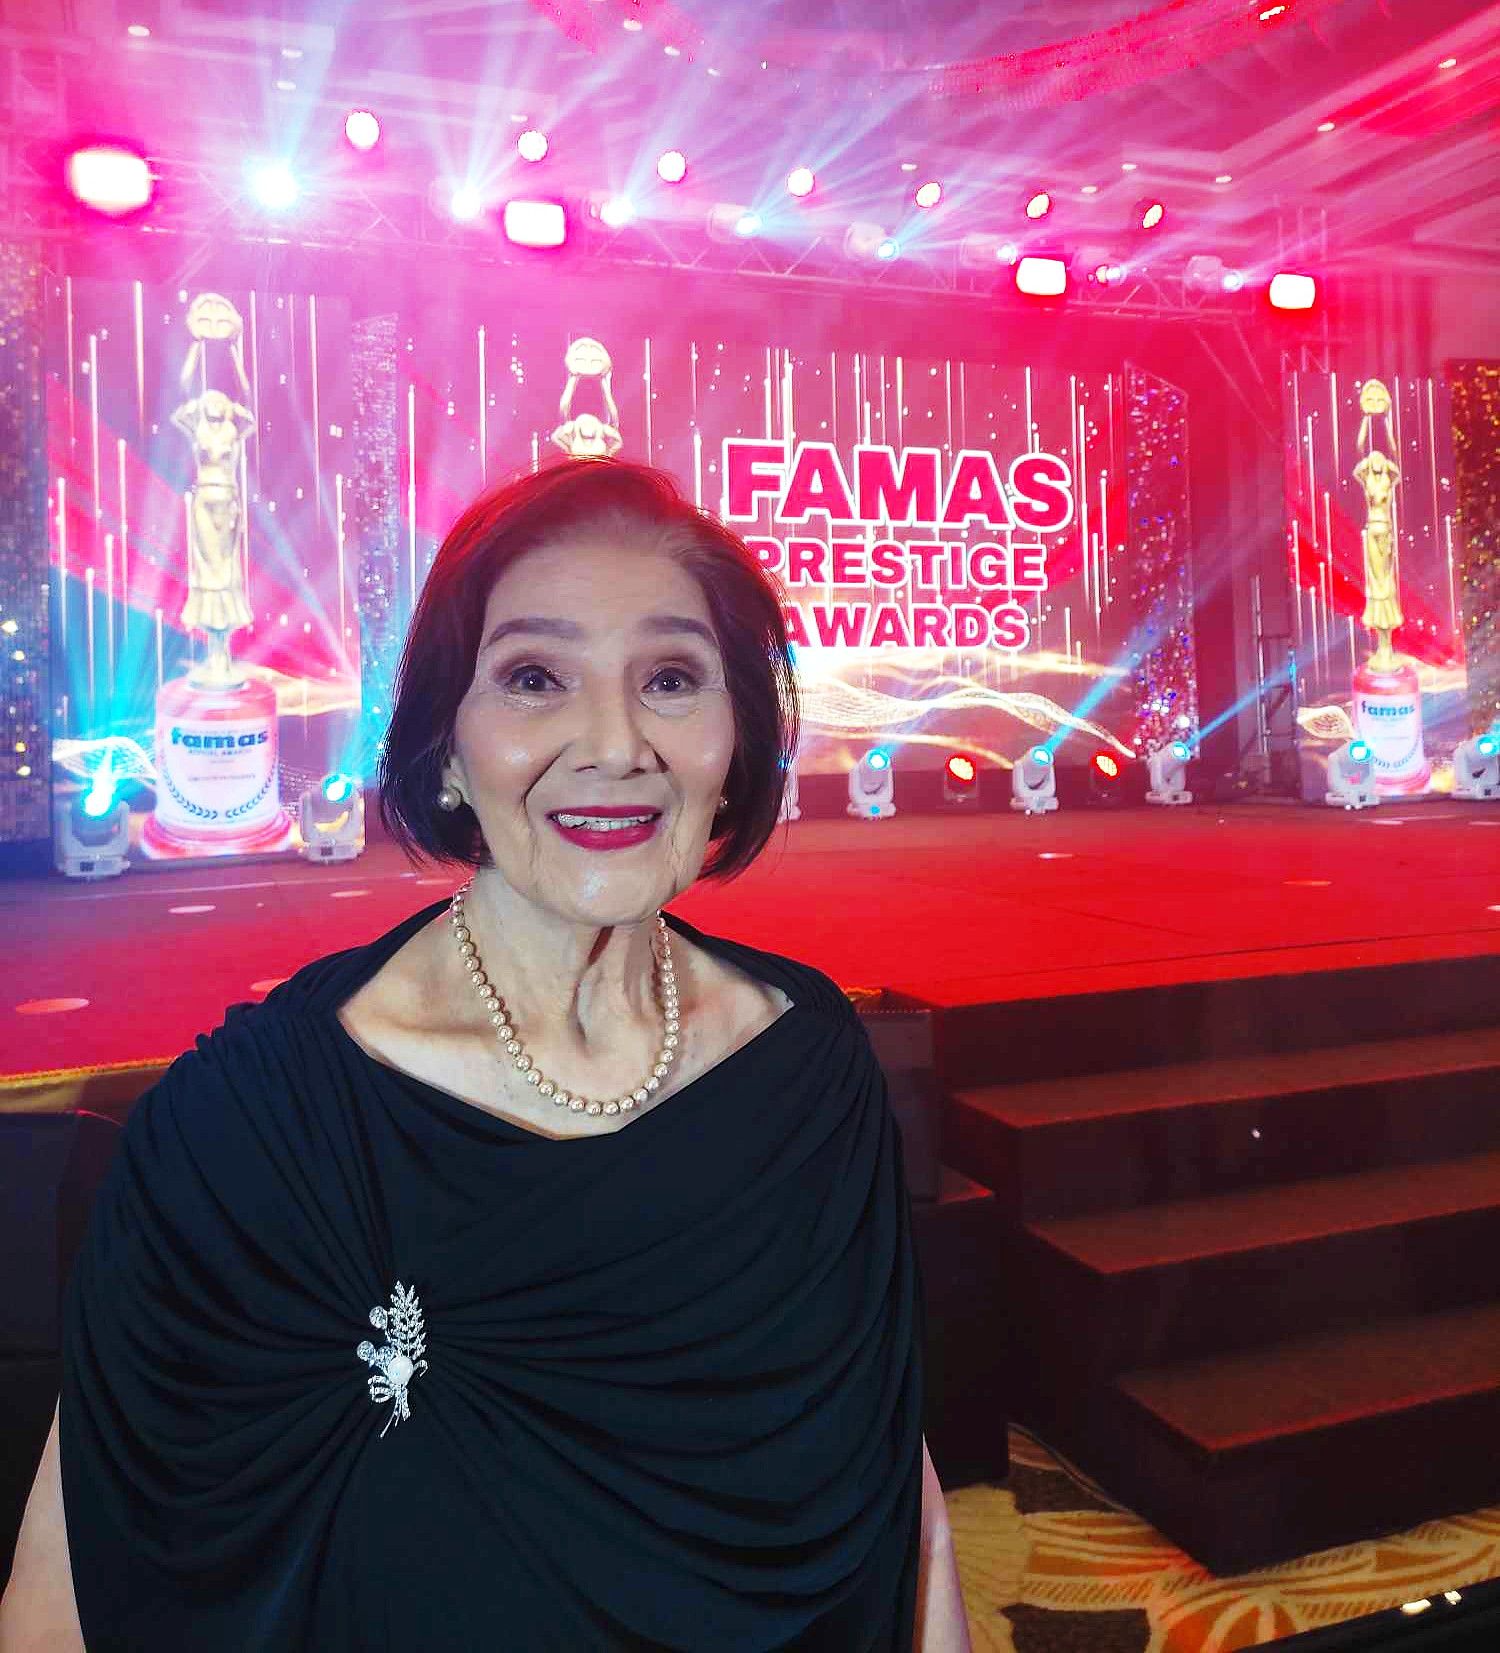 In The FAMAS Awards Scandal, Is An Apology Enough?